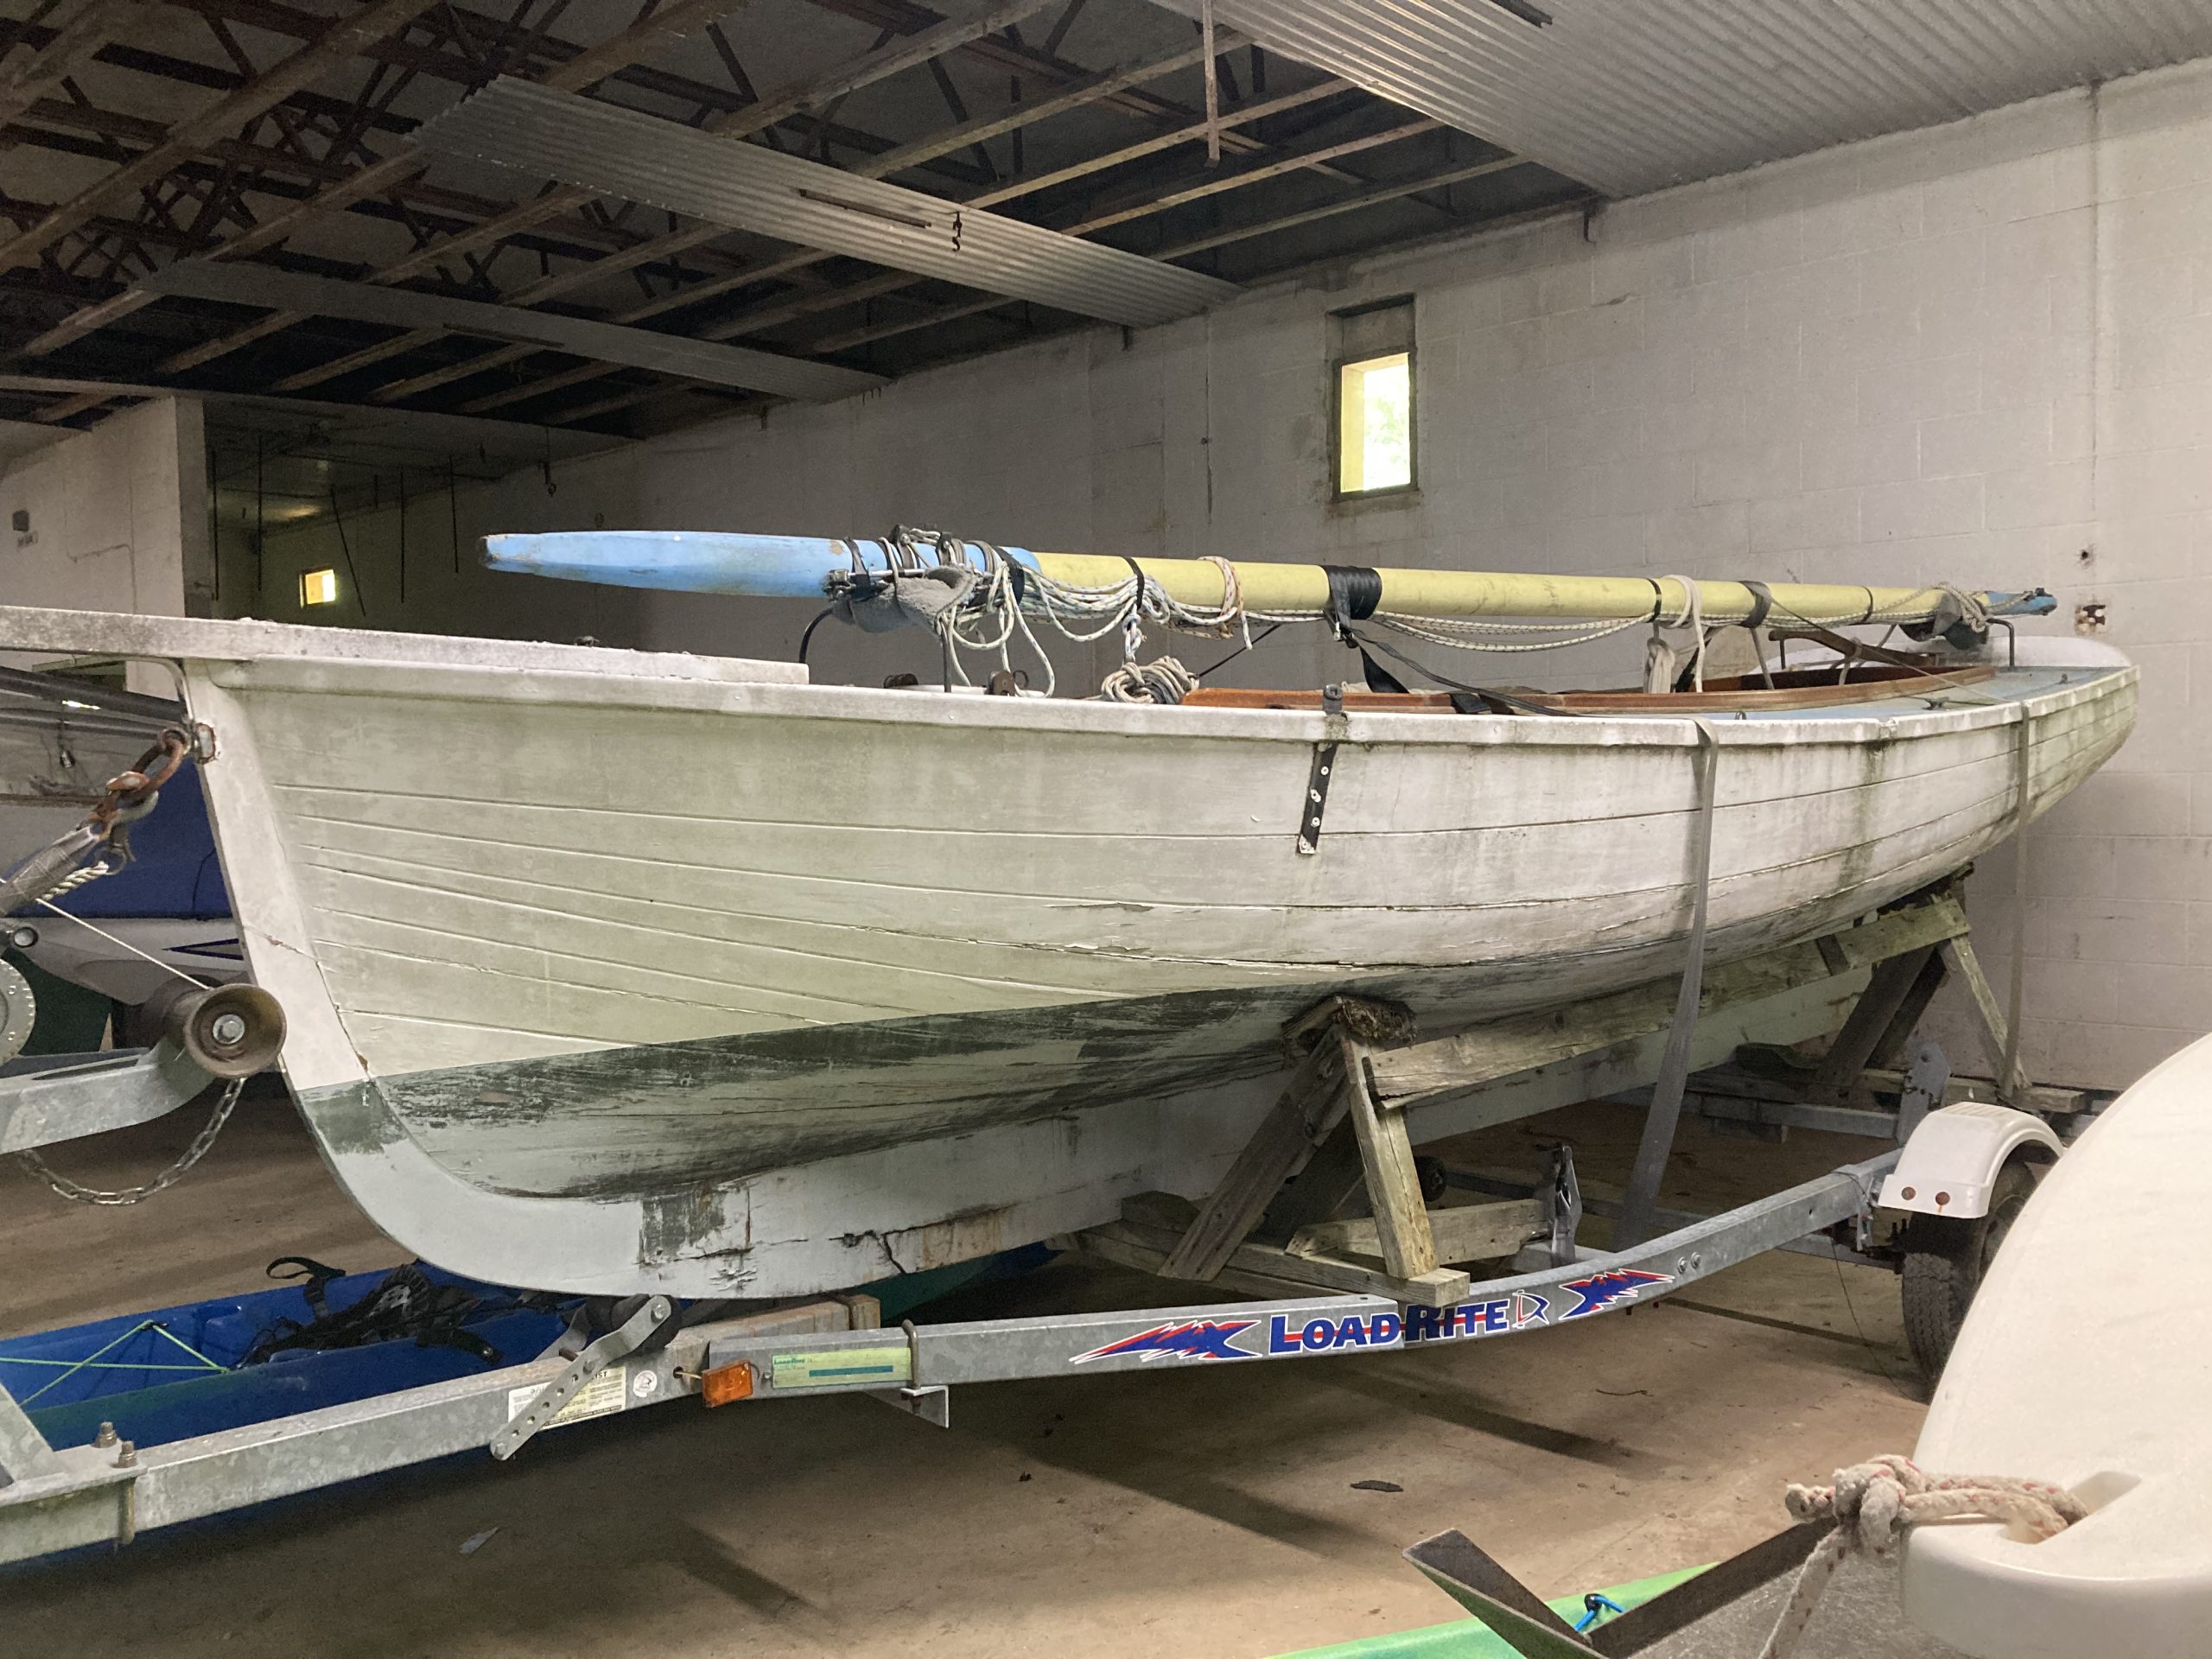 The 18-foot Abaco sloop is believed to be the last of its type in existence